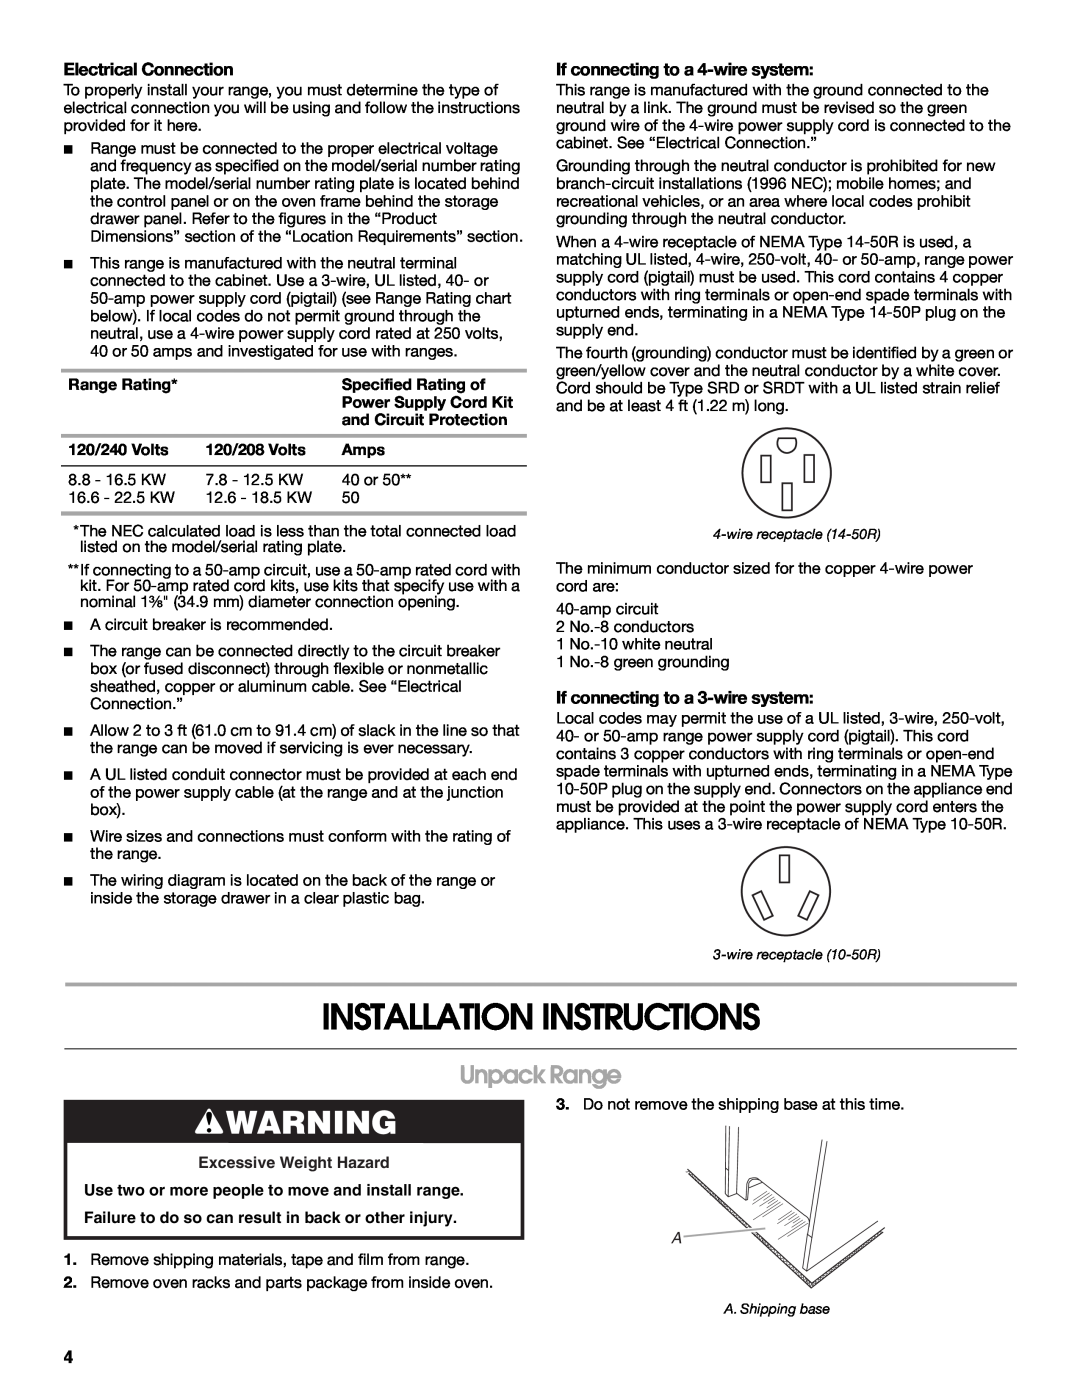 Amana W10196158B Installation Instructions, Unpack Range, Electrical Connection, If connecting to a 4-wire system 